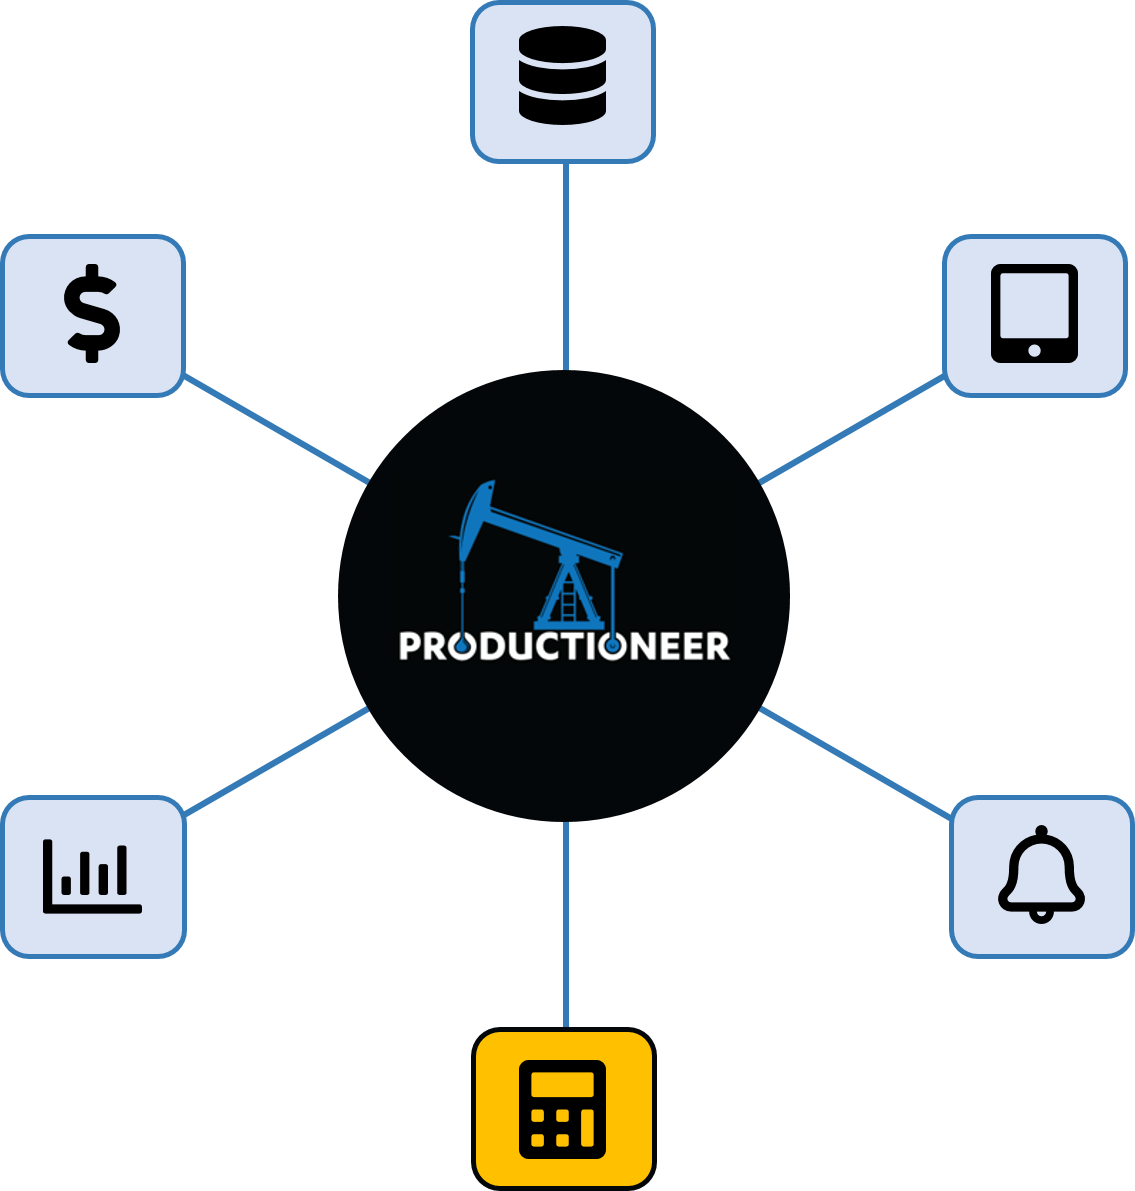 Productioneer allocations feature wheel